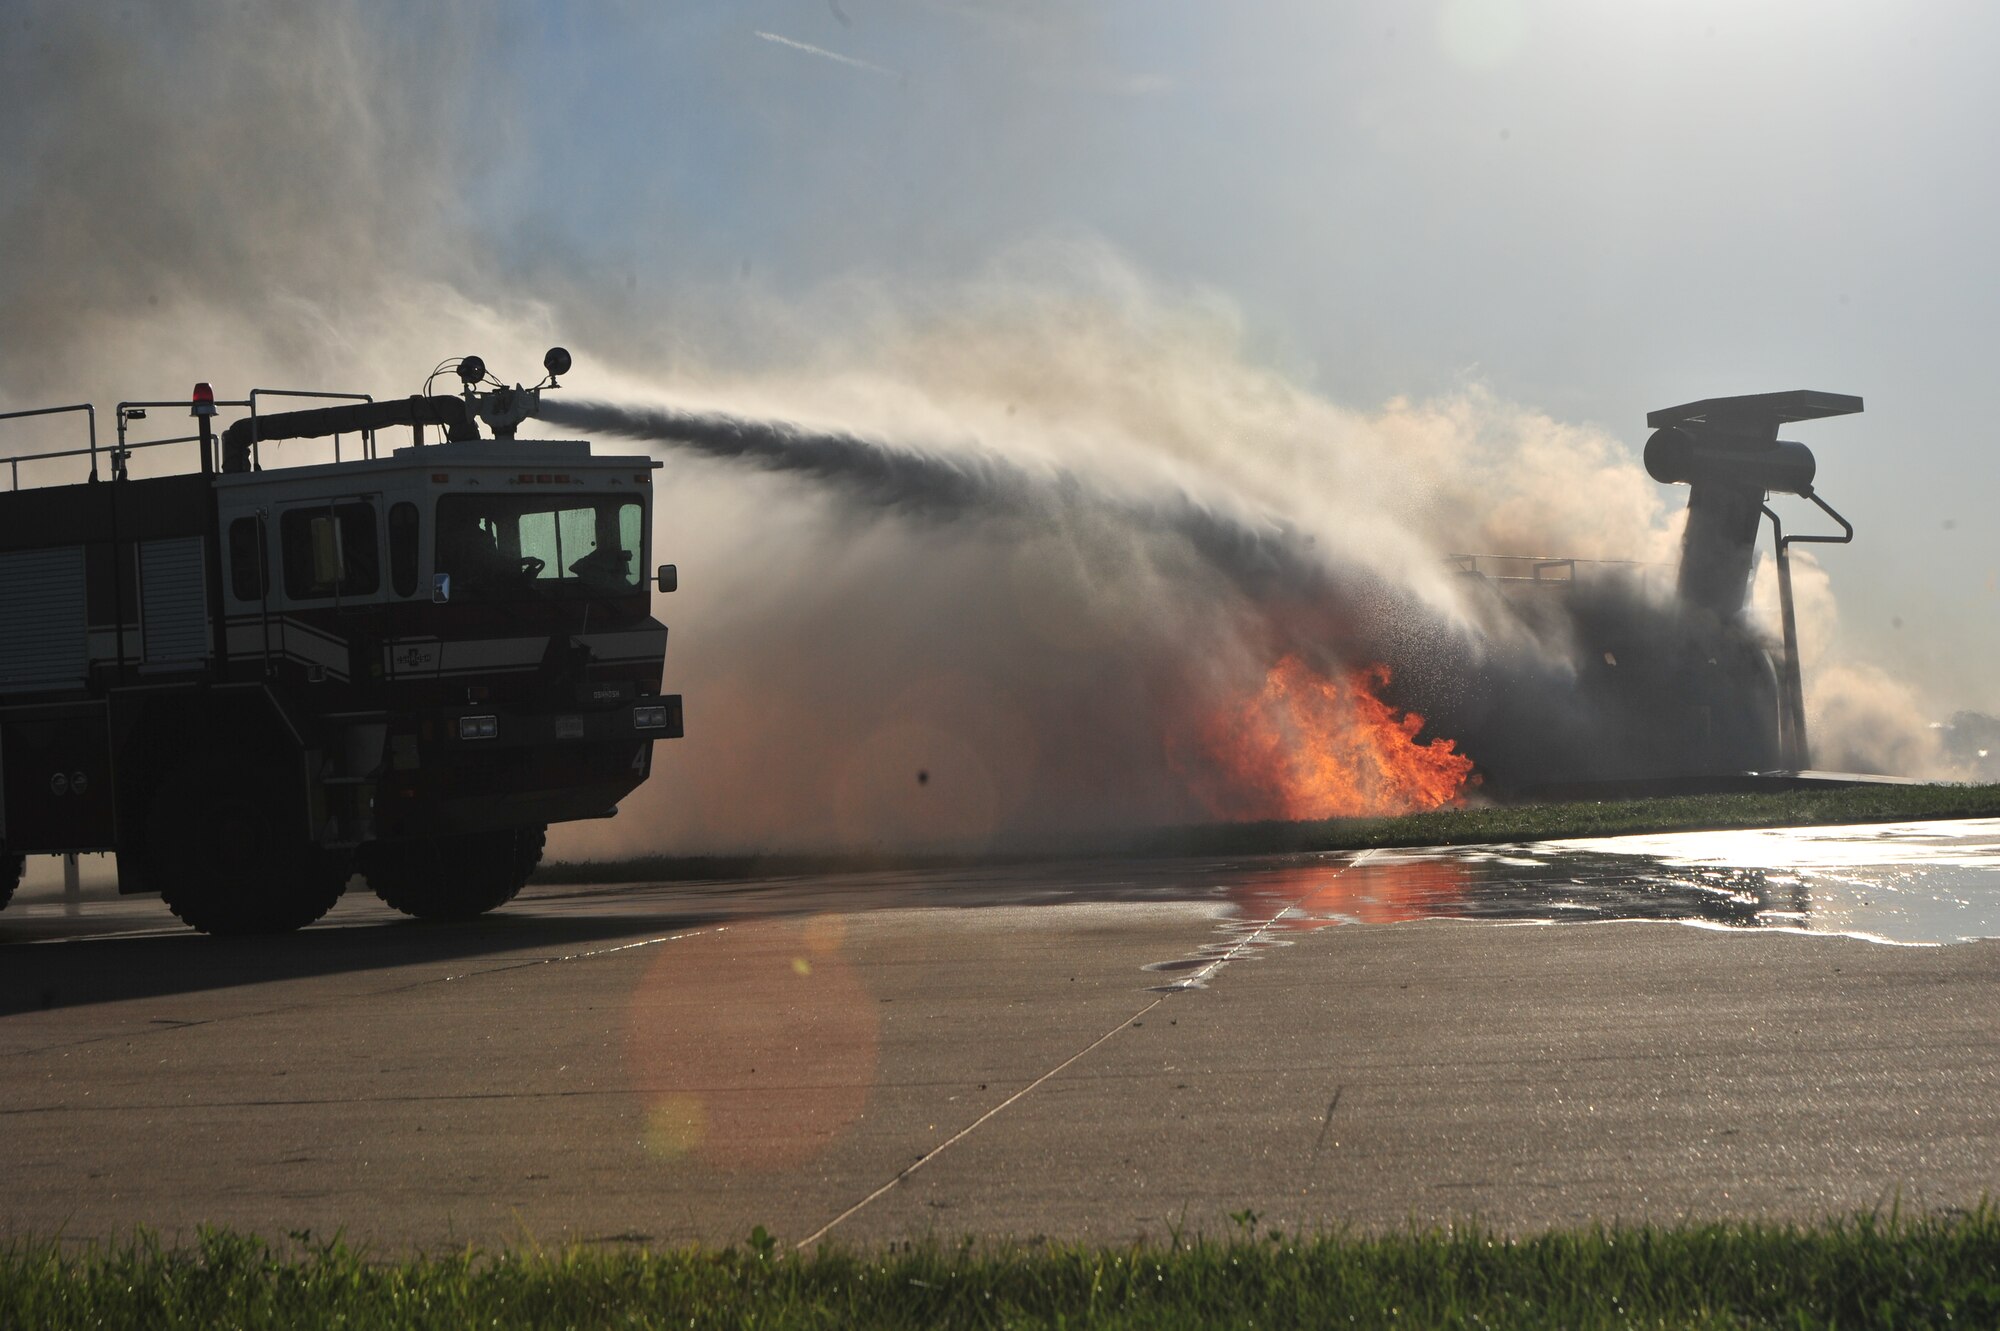 Firefighters from the 509th Civil Engineer Squadron move their fire engine into position to extinguish a simulated aircraft fire during a major accident response exercise (MARE) at Whiteman Air Force Base, Mo., June 8, 2016. Firefighters and other emergency response personnel conducted the MARE to prepare for any mishaps that may occur in real-world situations. (US Air Force photo by Senior Airman Jovan Banks)